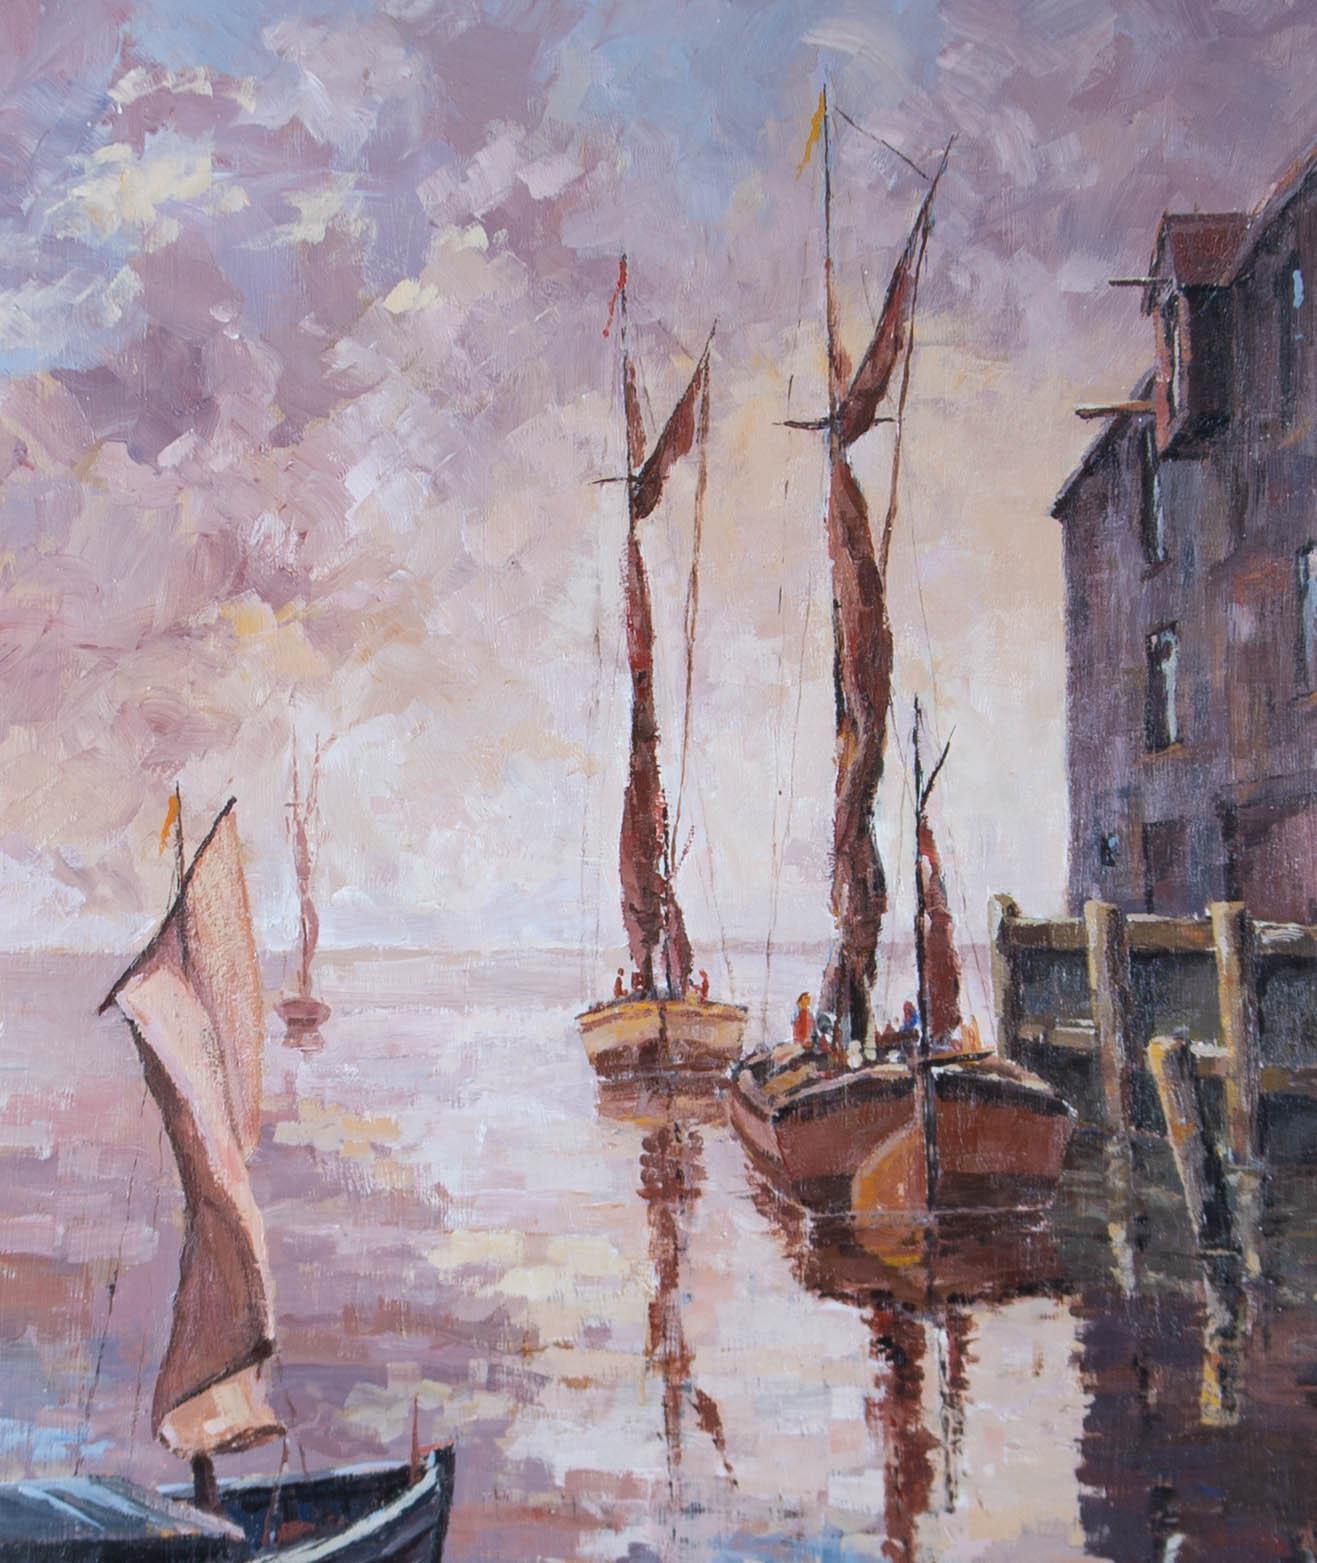 A stunning seascape overlooking the ships in the evening as they set sail. The artist's use of different brush strokes and coloursÂ show the movement in the water as well as the changing colours of the sky during sunset. Well presented in an ornate